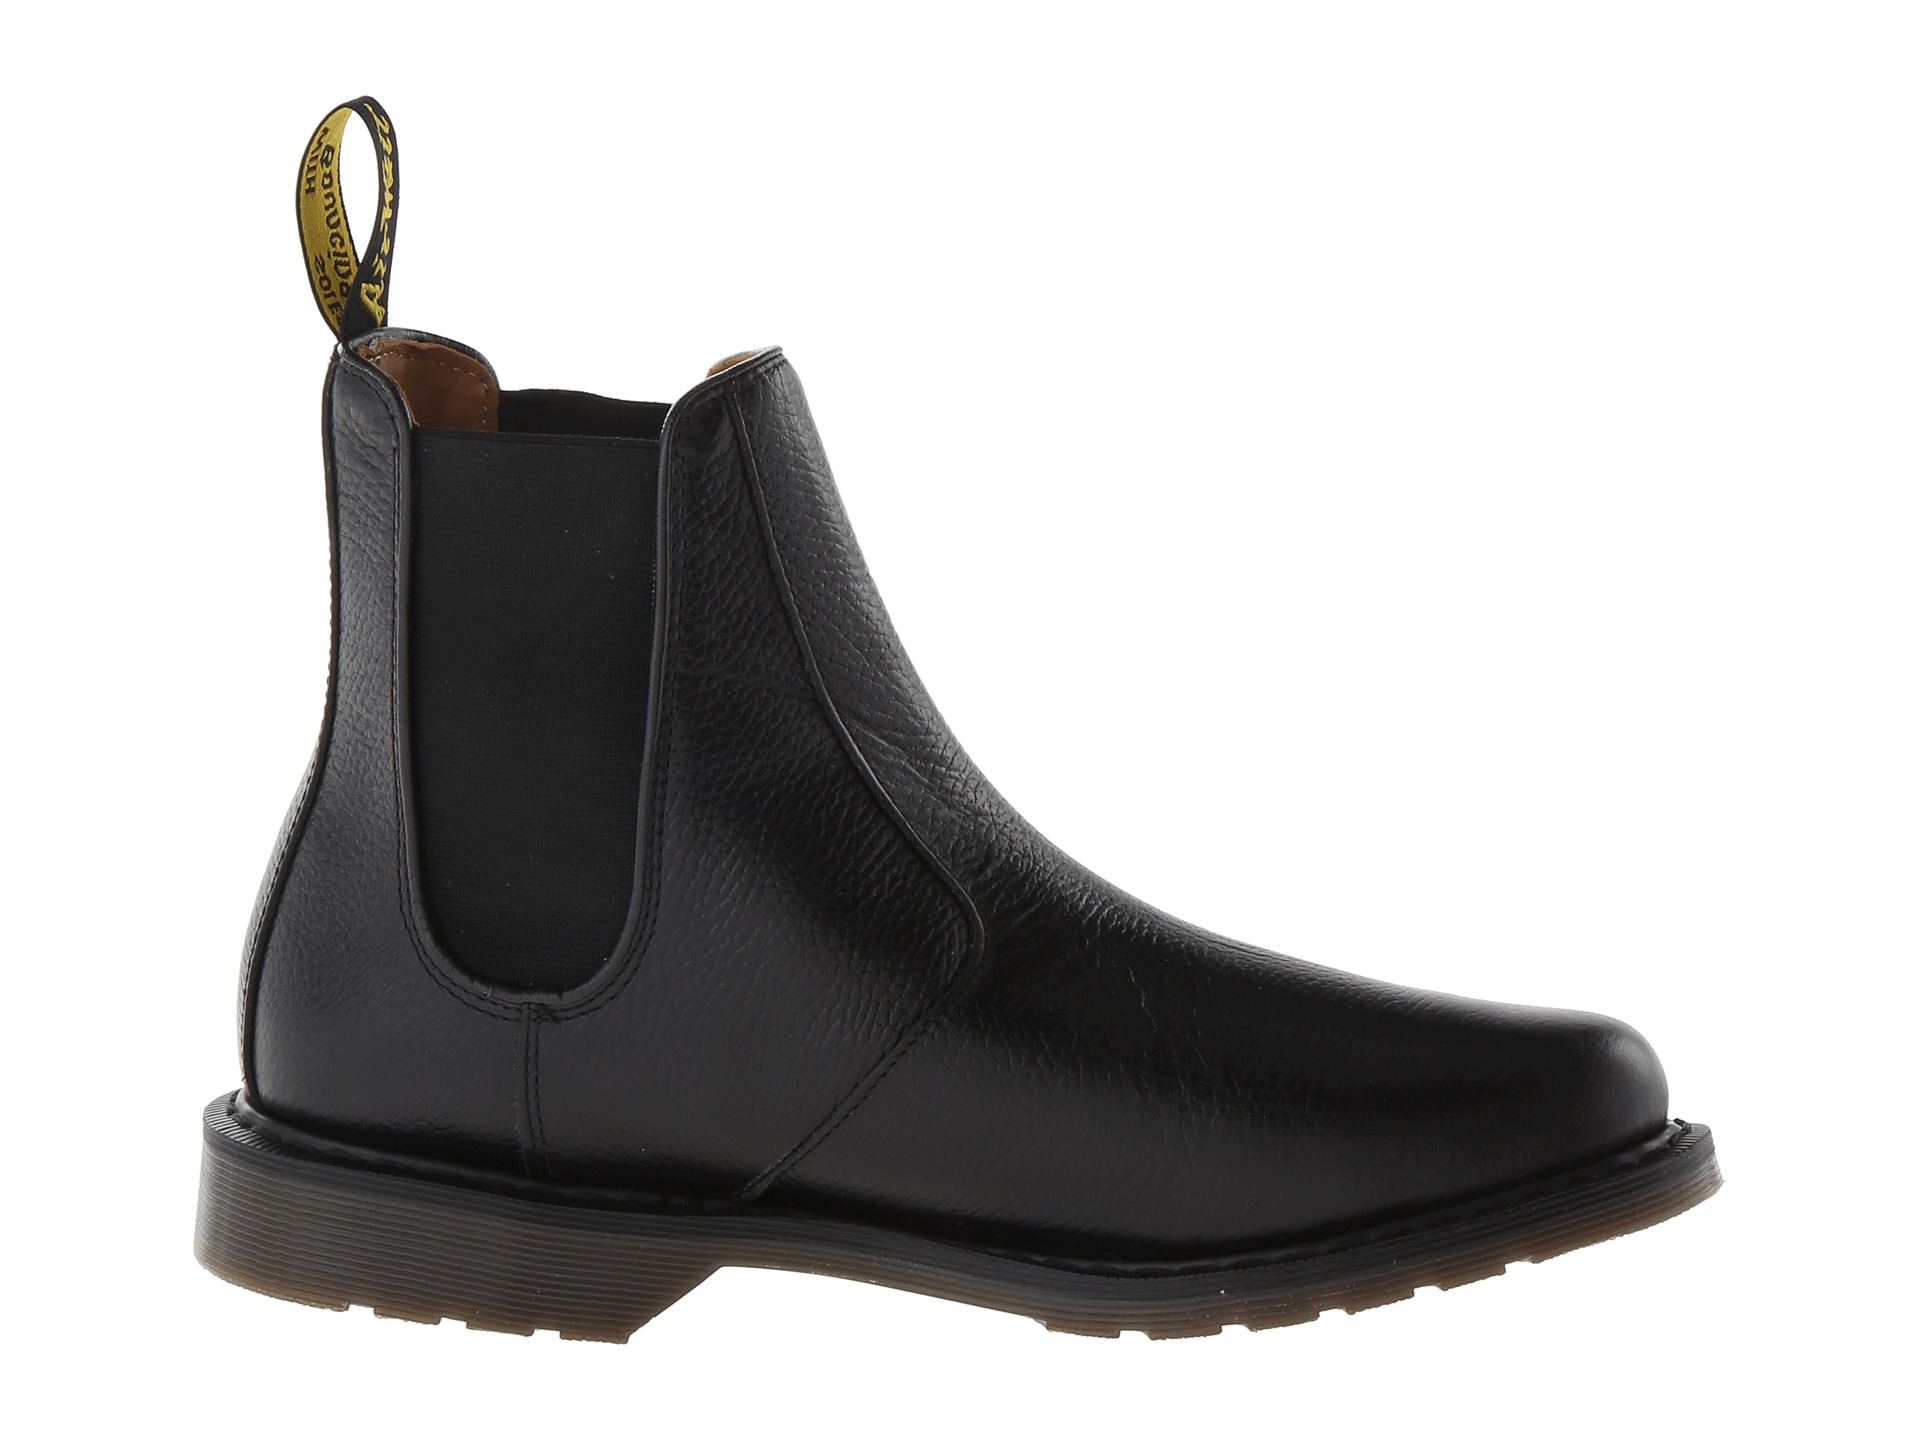 Dr. Martens Victor Chelsea Boot at Zappos.com